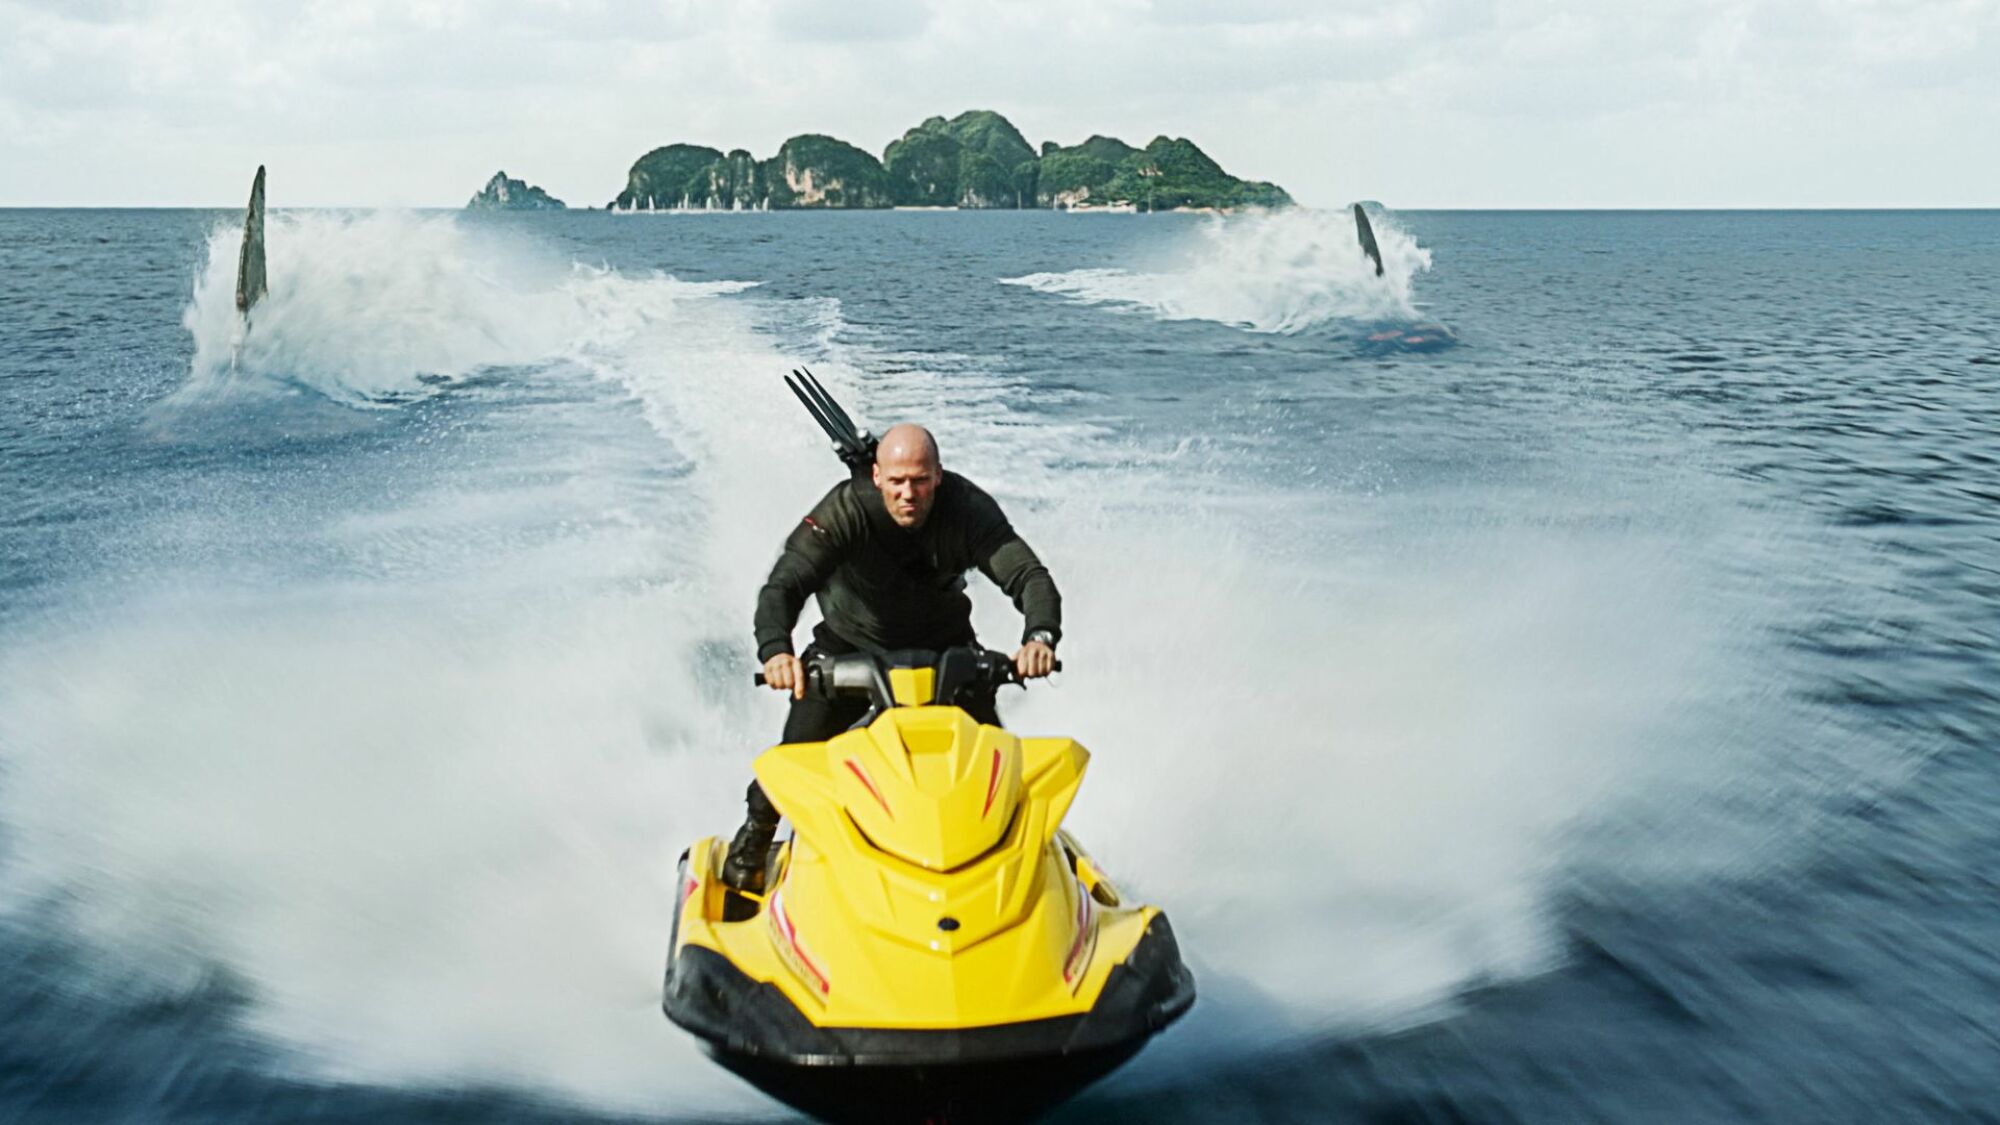 Jason Statham races away from a megladon in "Meg 2: The Trench."